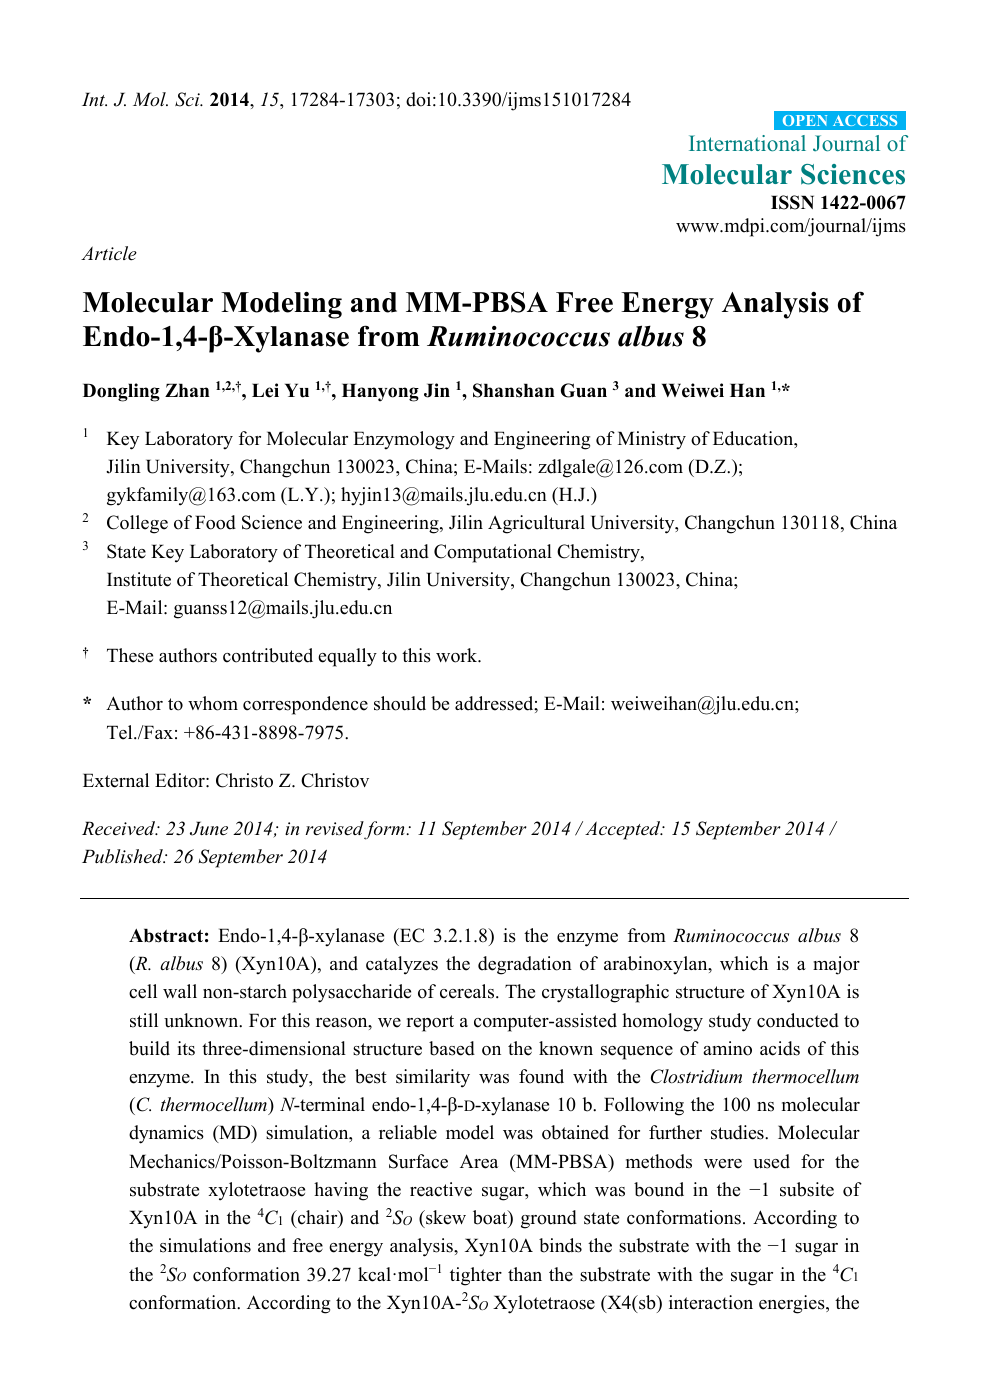 Molecular Modeling And Mm Pbsa Free Energy Analysis Of Endo 1 4 B Xylanase From Ruminococcus Albus 8 Topic Of Research Paper In Biological Sciences Download Scholarly Article Pdf And Read For Free On Cyberleninka Open